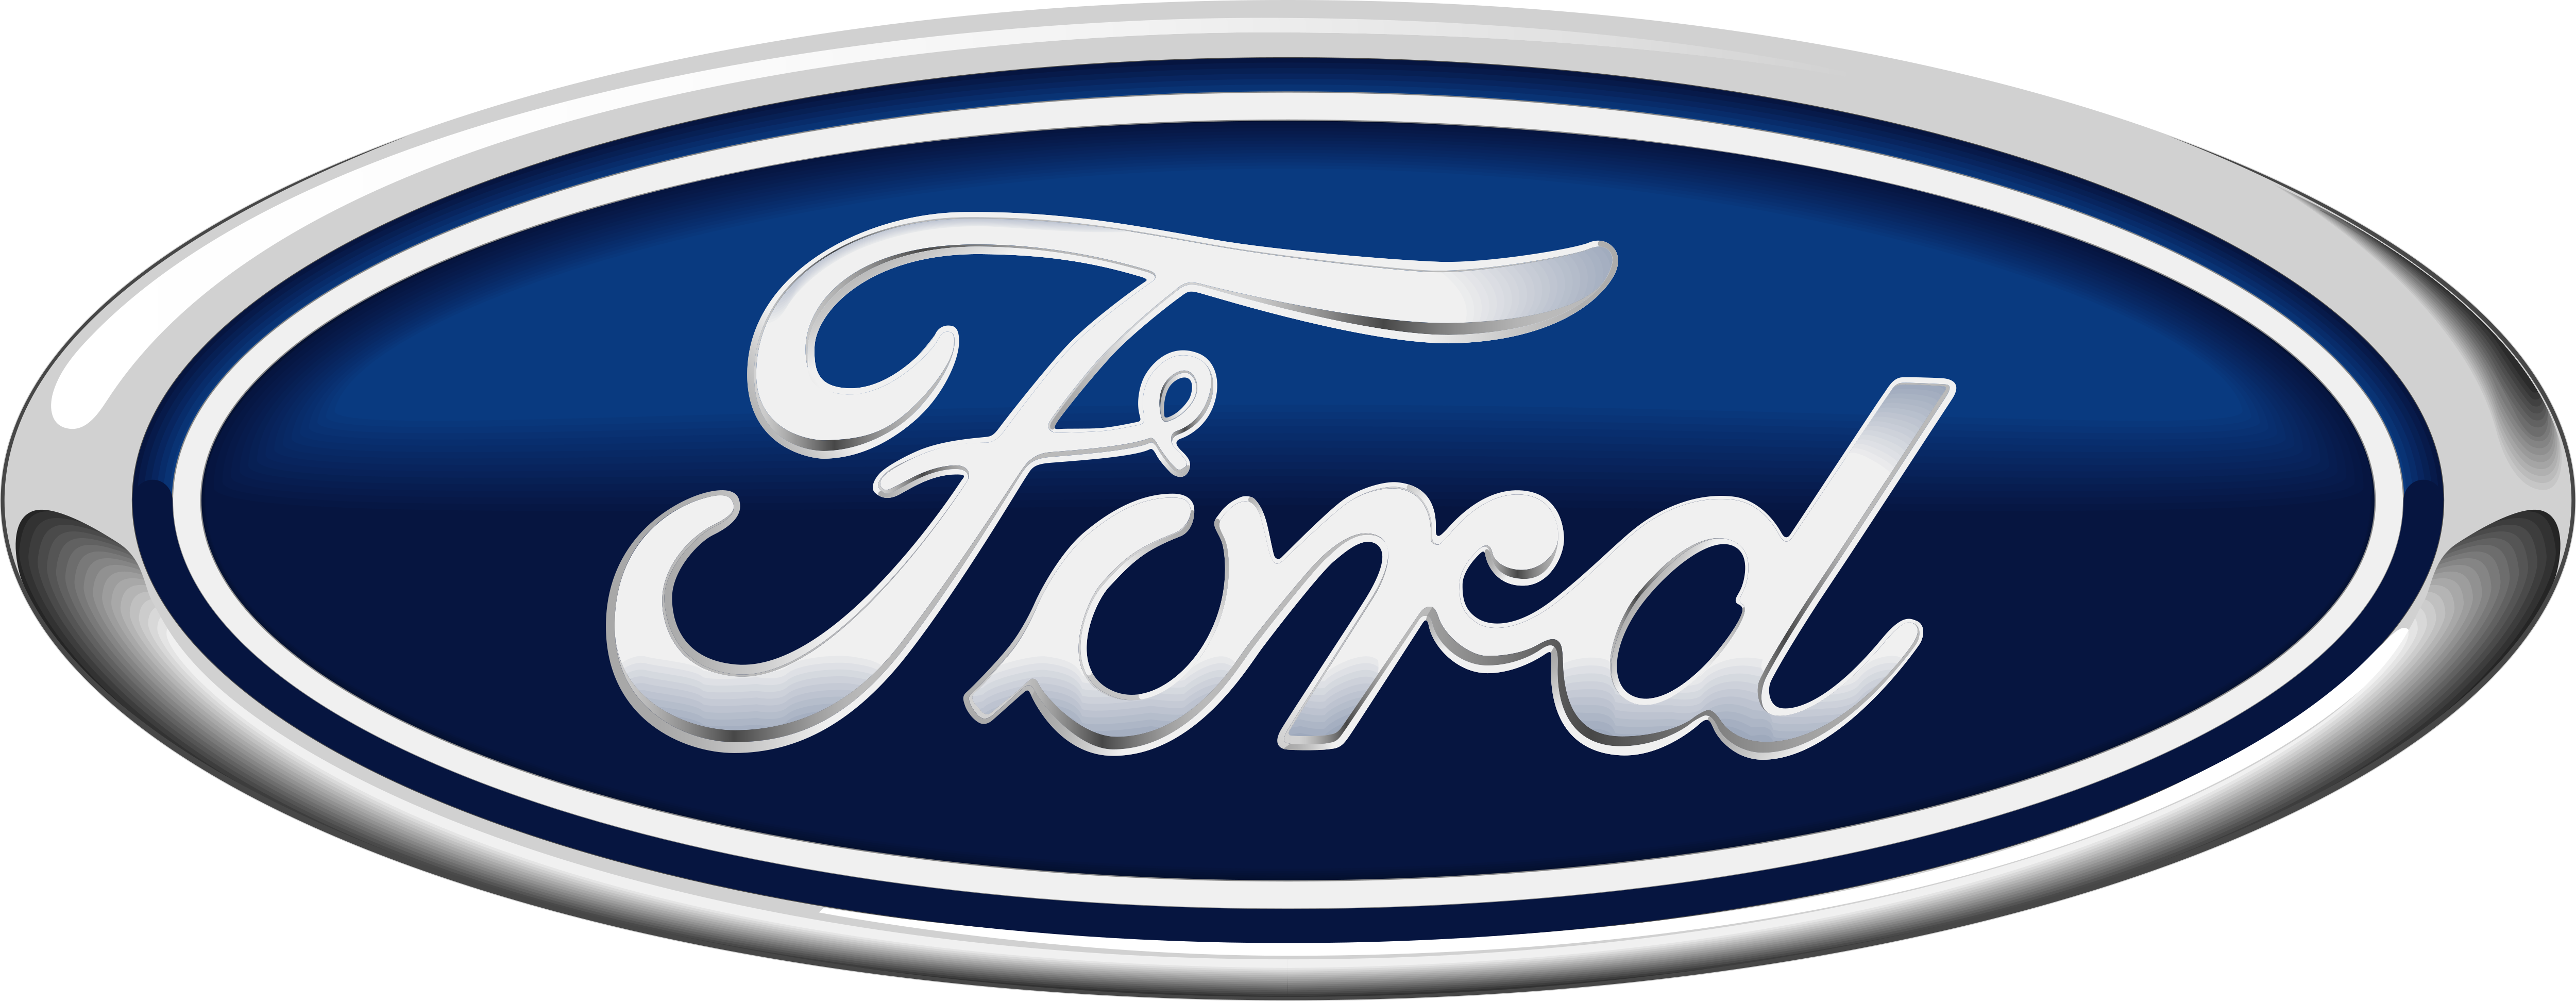 https://www.pngplay.com/wp-content/uploads/13/Ford-Logo-PNG-Images-HD.png